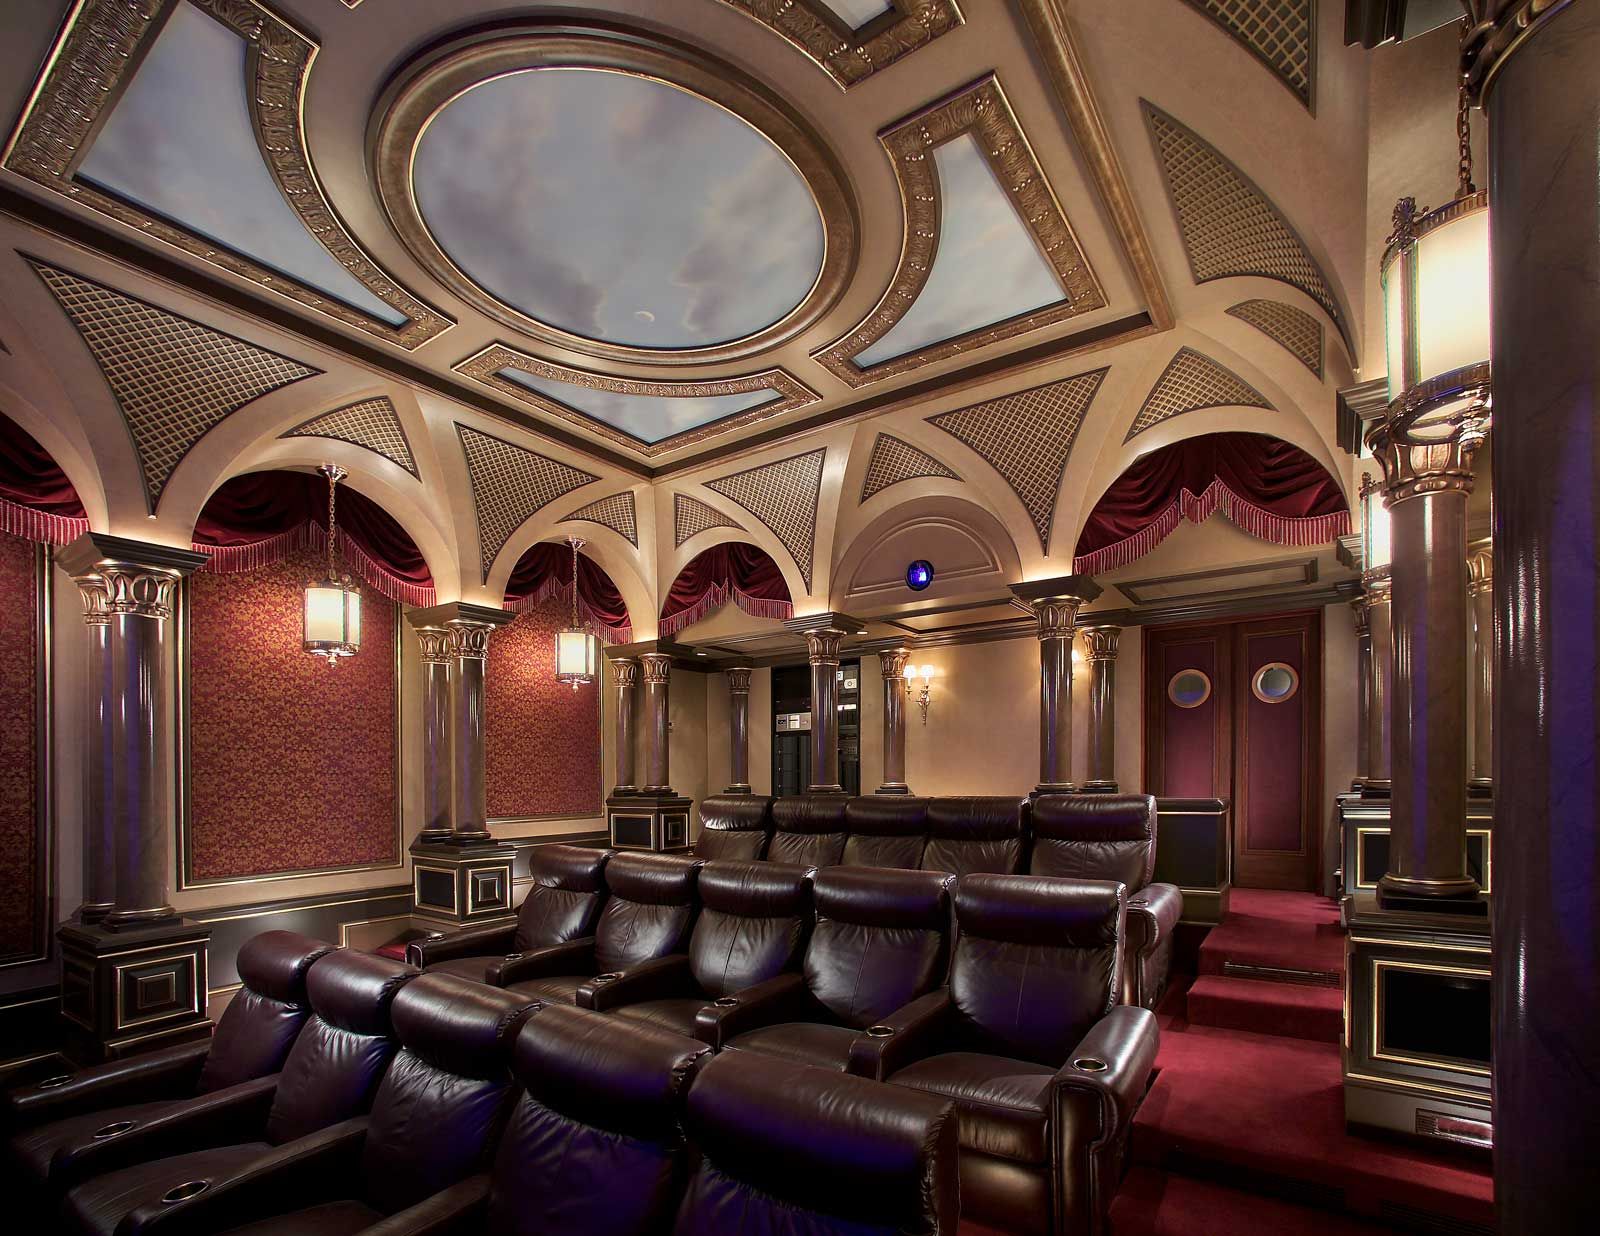 Home Theater, Traditional, Future Home Theater, Home Theater Installation, Details, Arch